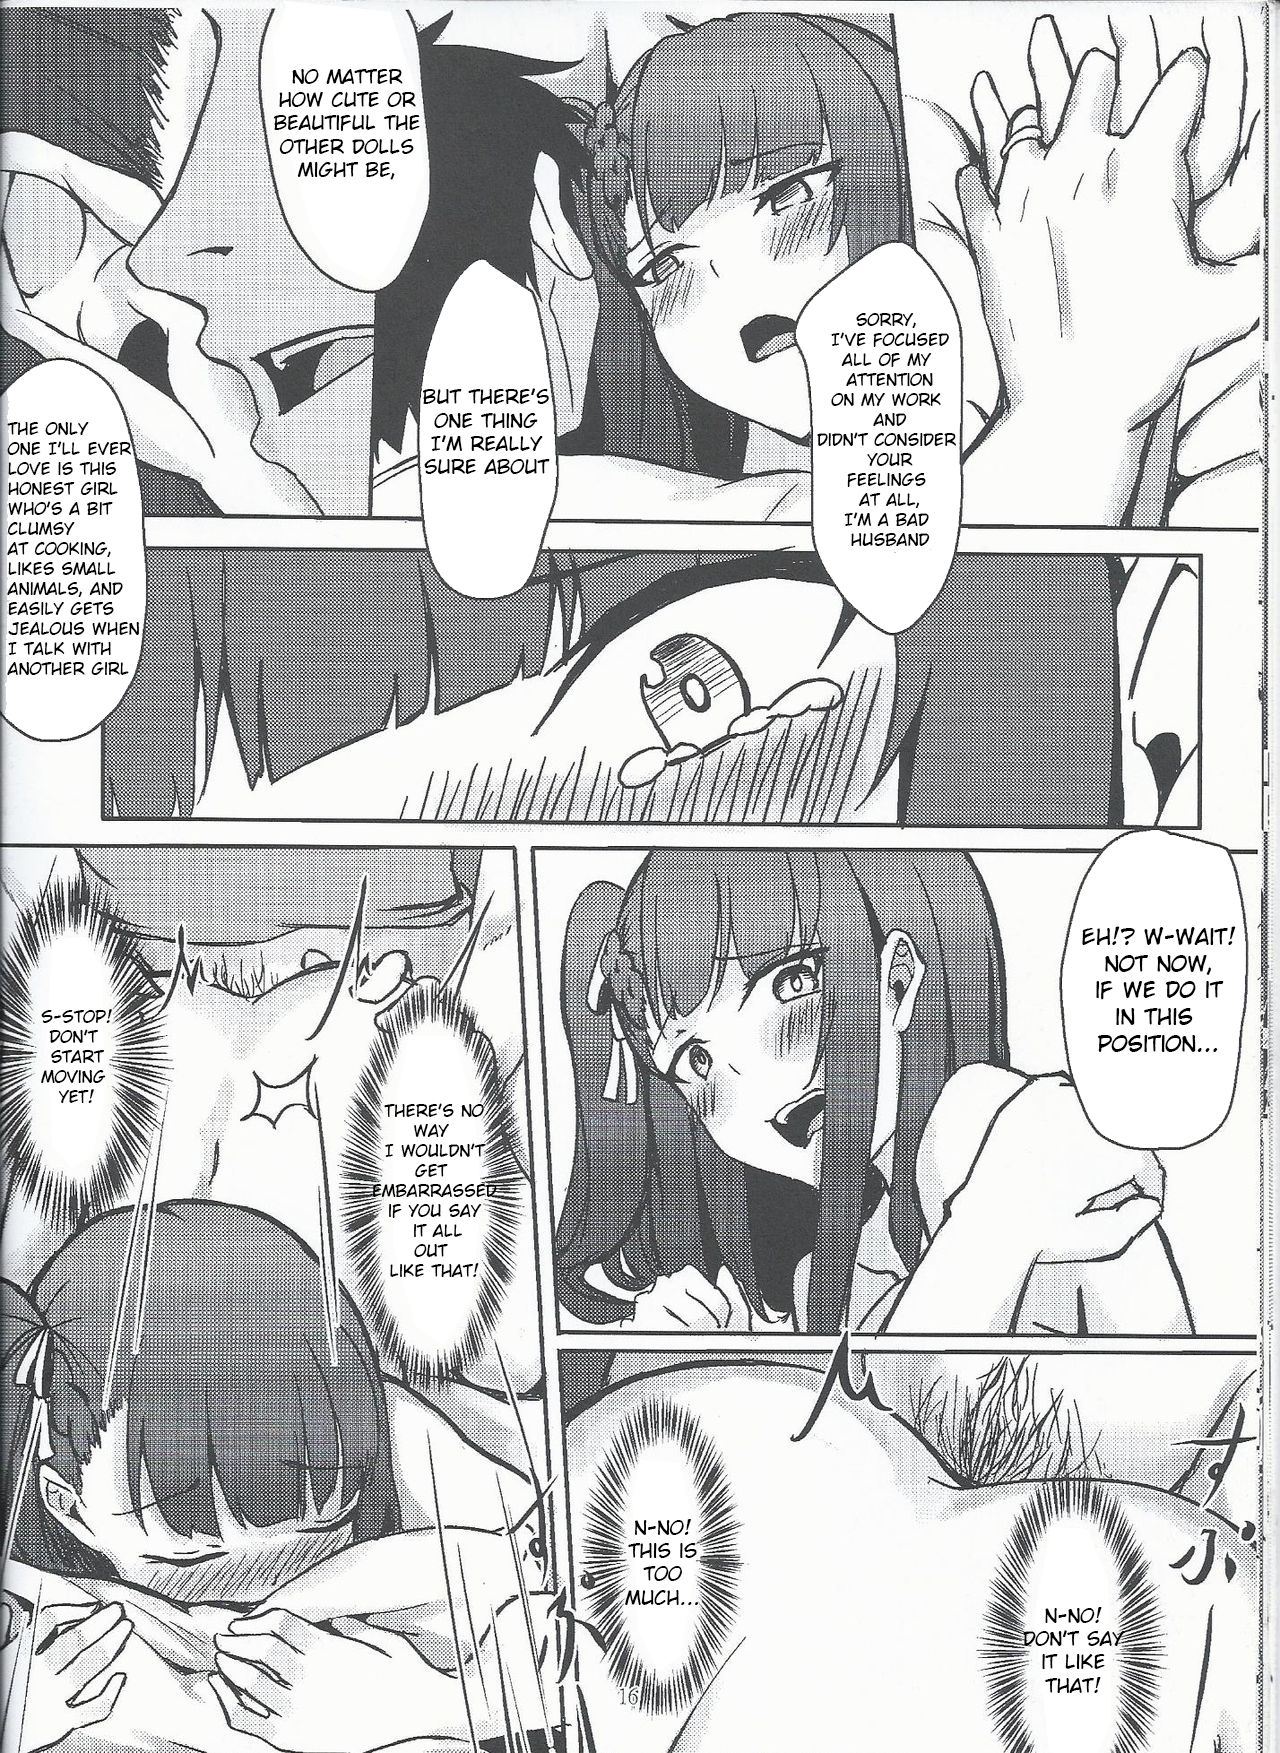 (FF32) [Sumi (九曜)] I don't know what to title this book, but anyway it's about WA2000 (Girls Frontline) [English] page 15 full